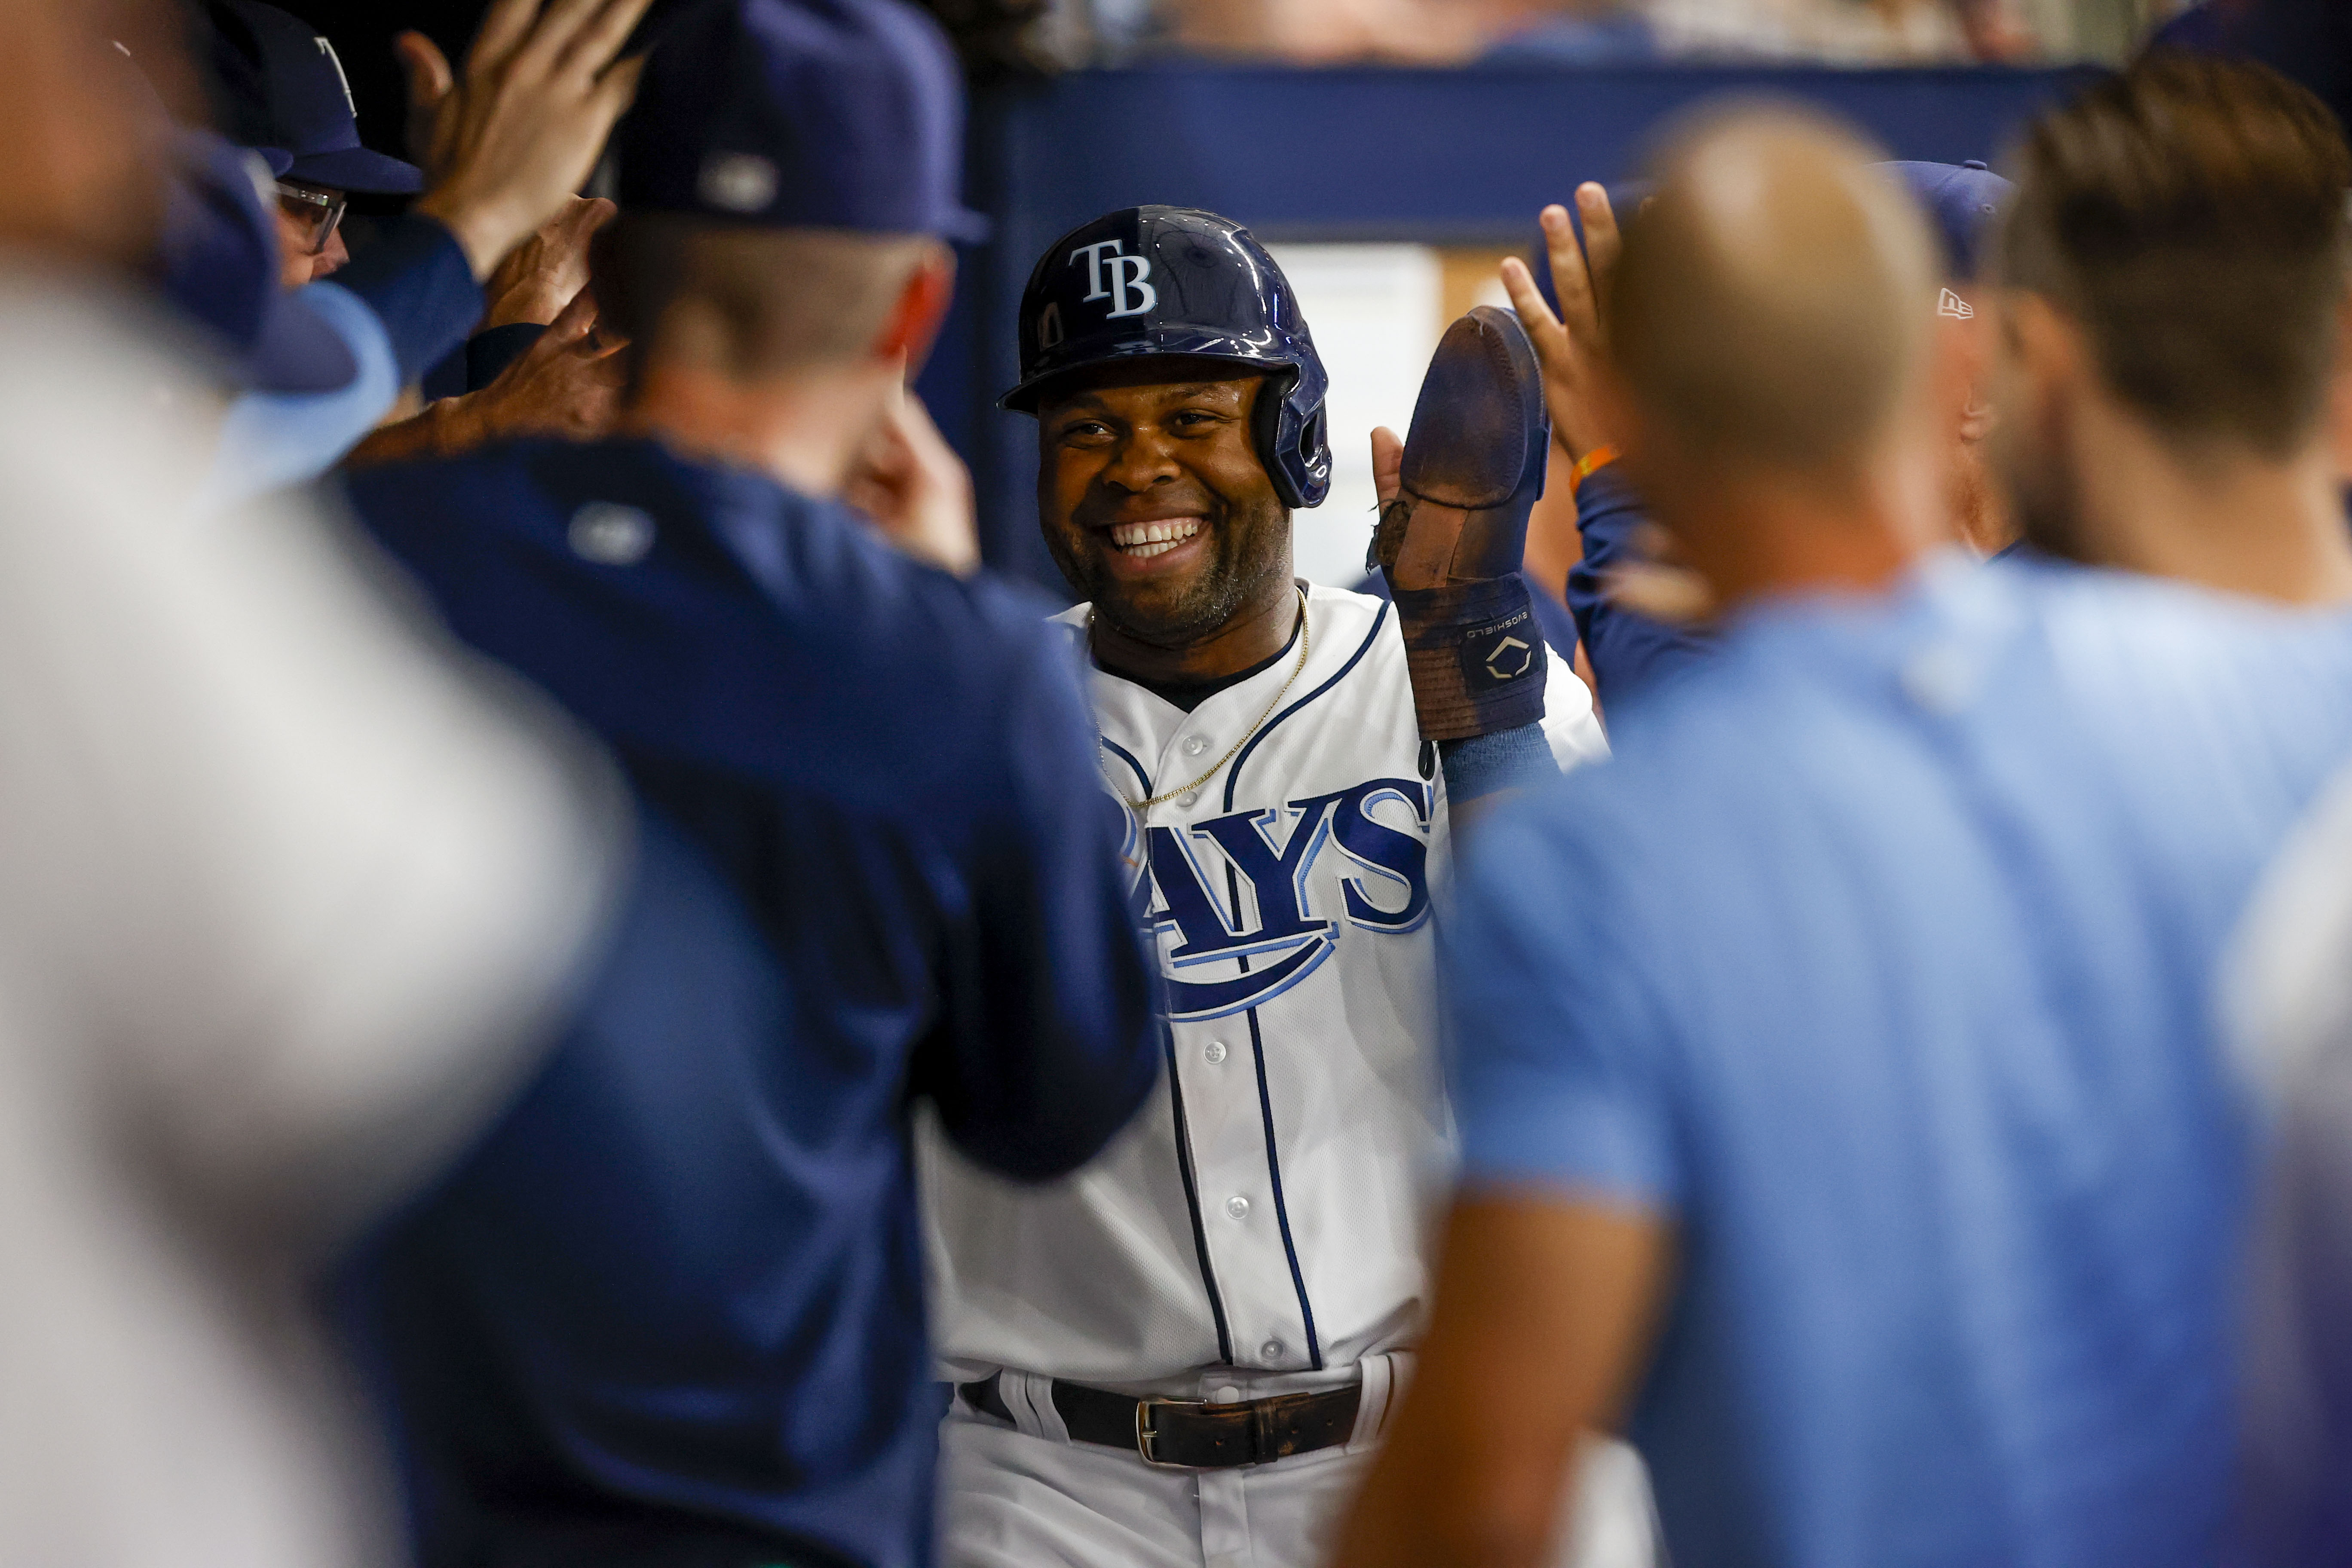 Rays to start 2022 season on the road against Red Sox